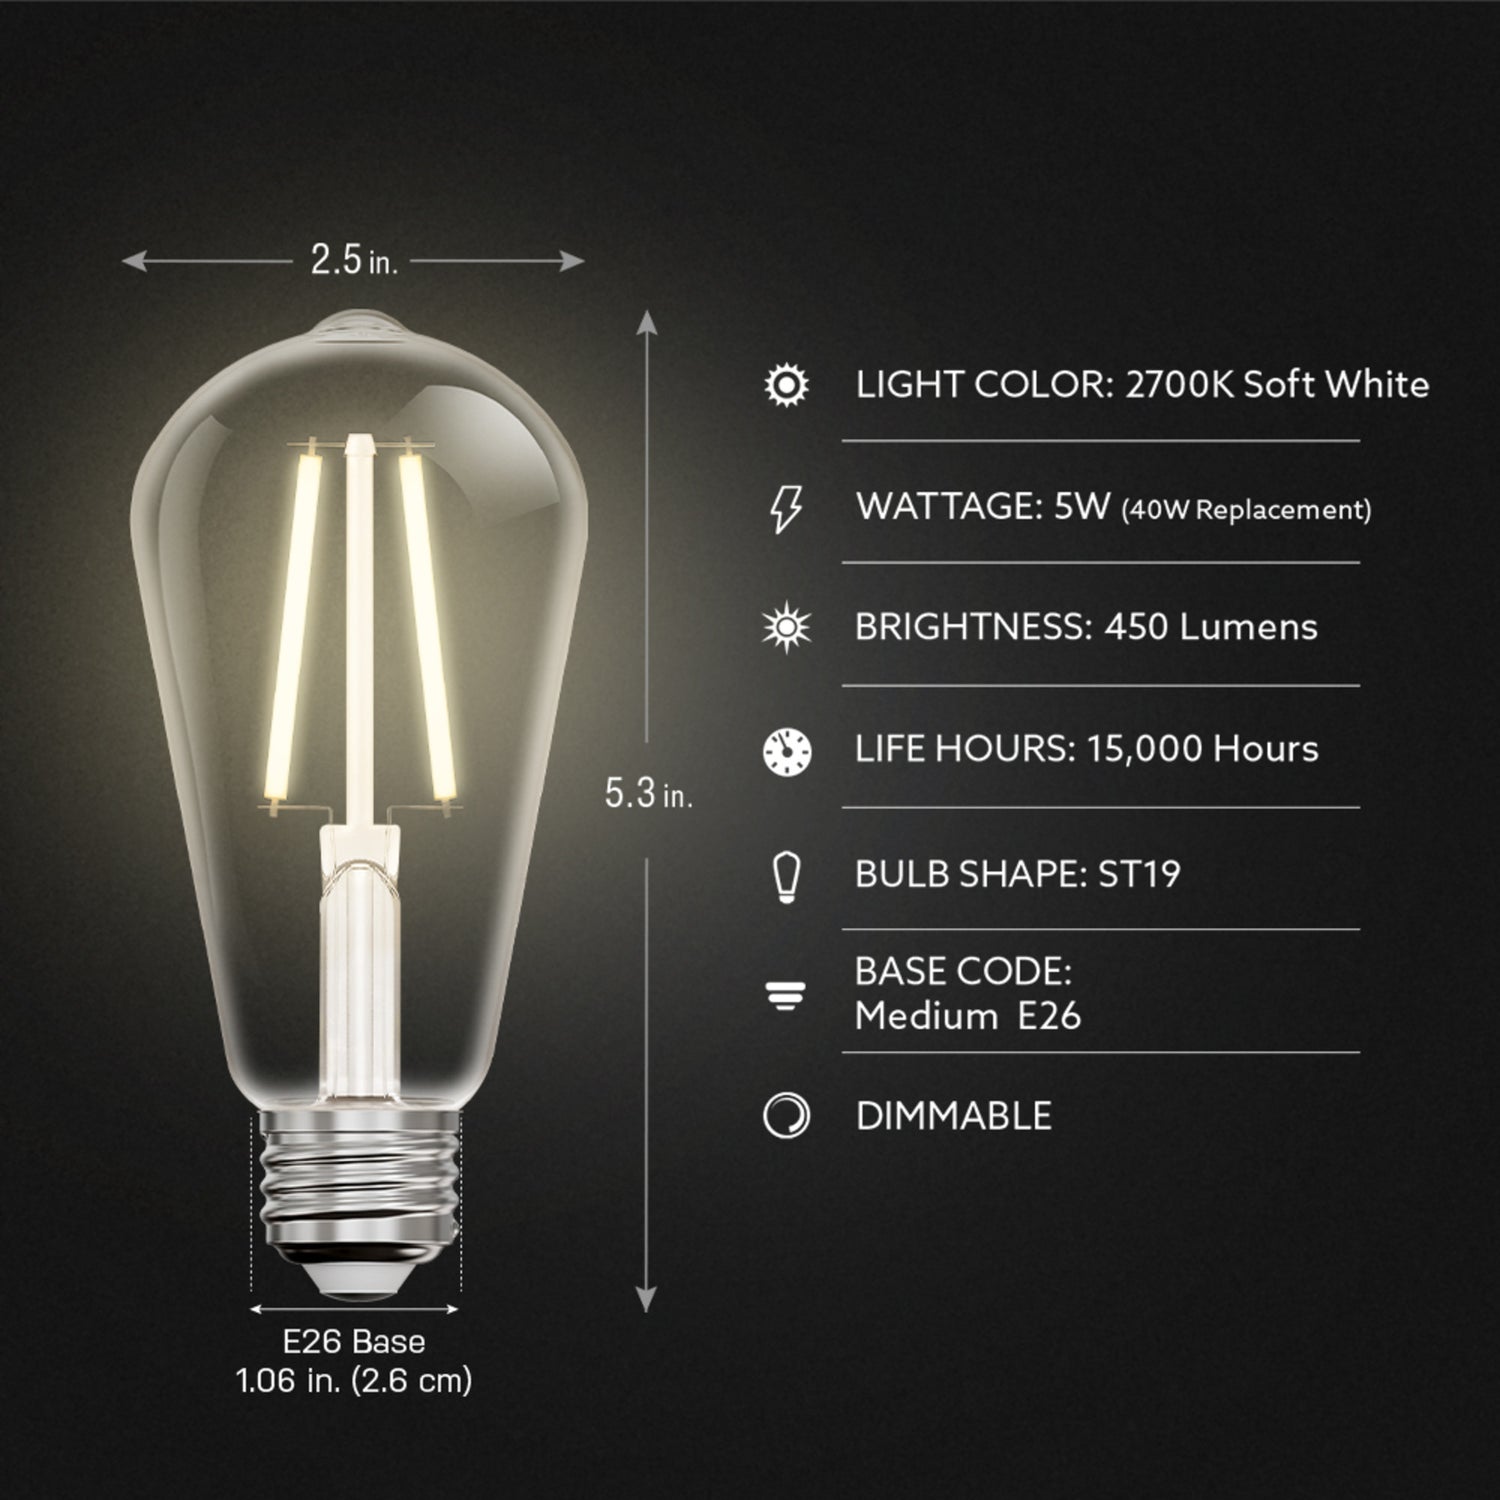 5W (40W Replacement) ST19 E26 Clear Glass Vintage Edison LED Light Bulb, Soft White (4-Pack)